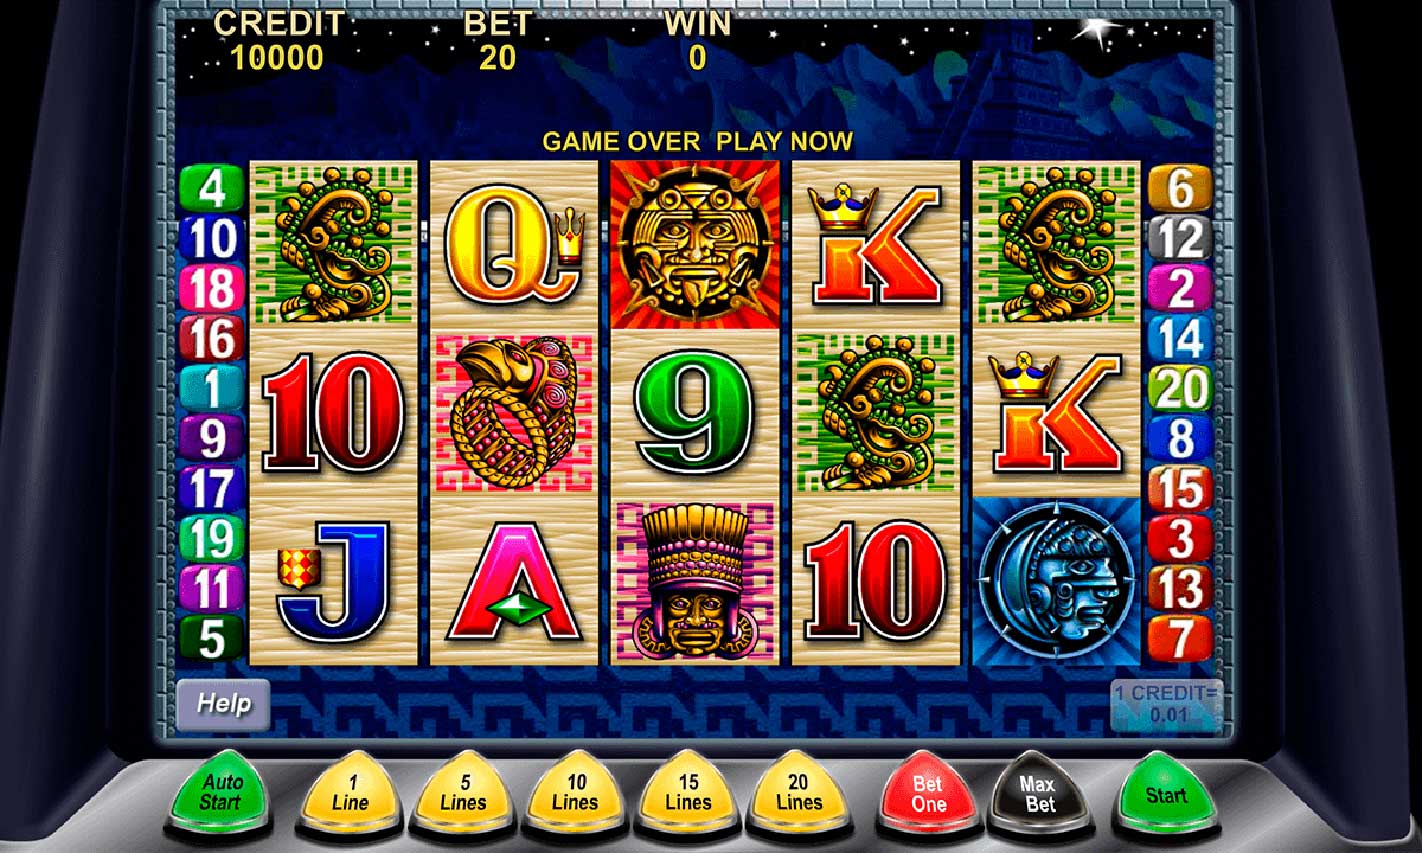 Are you finding the exclusive slot games with attractive deals?